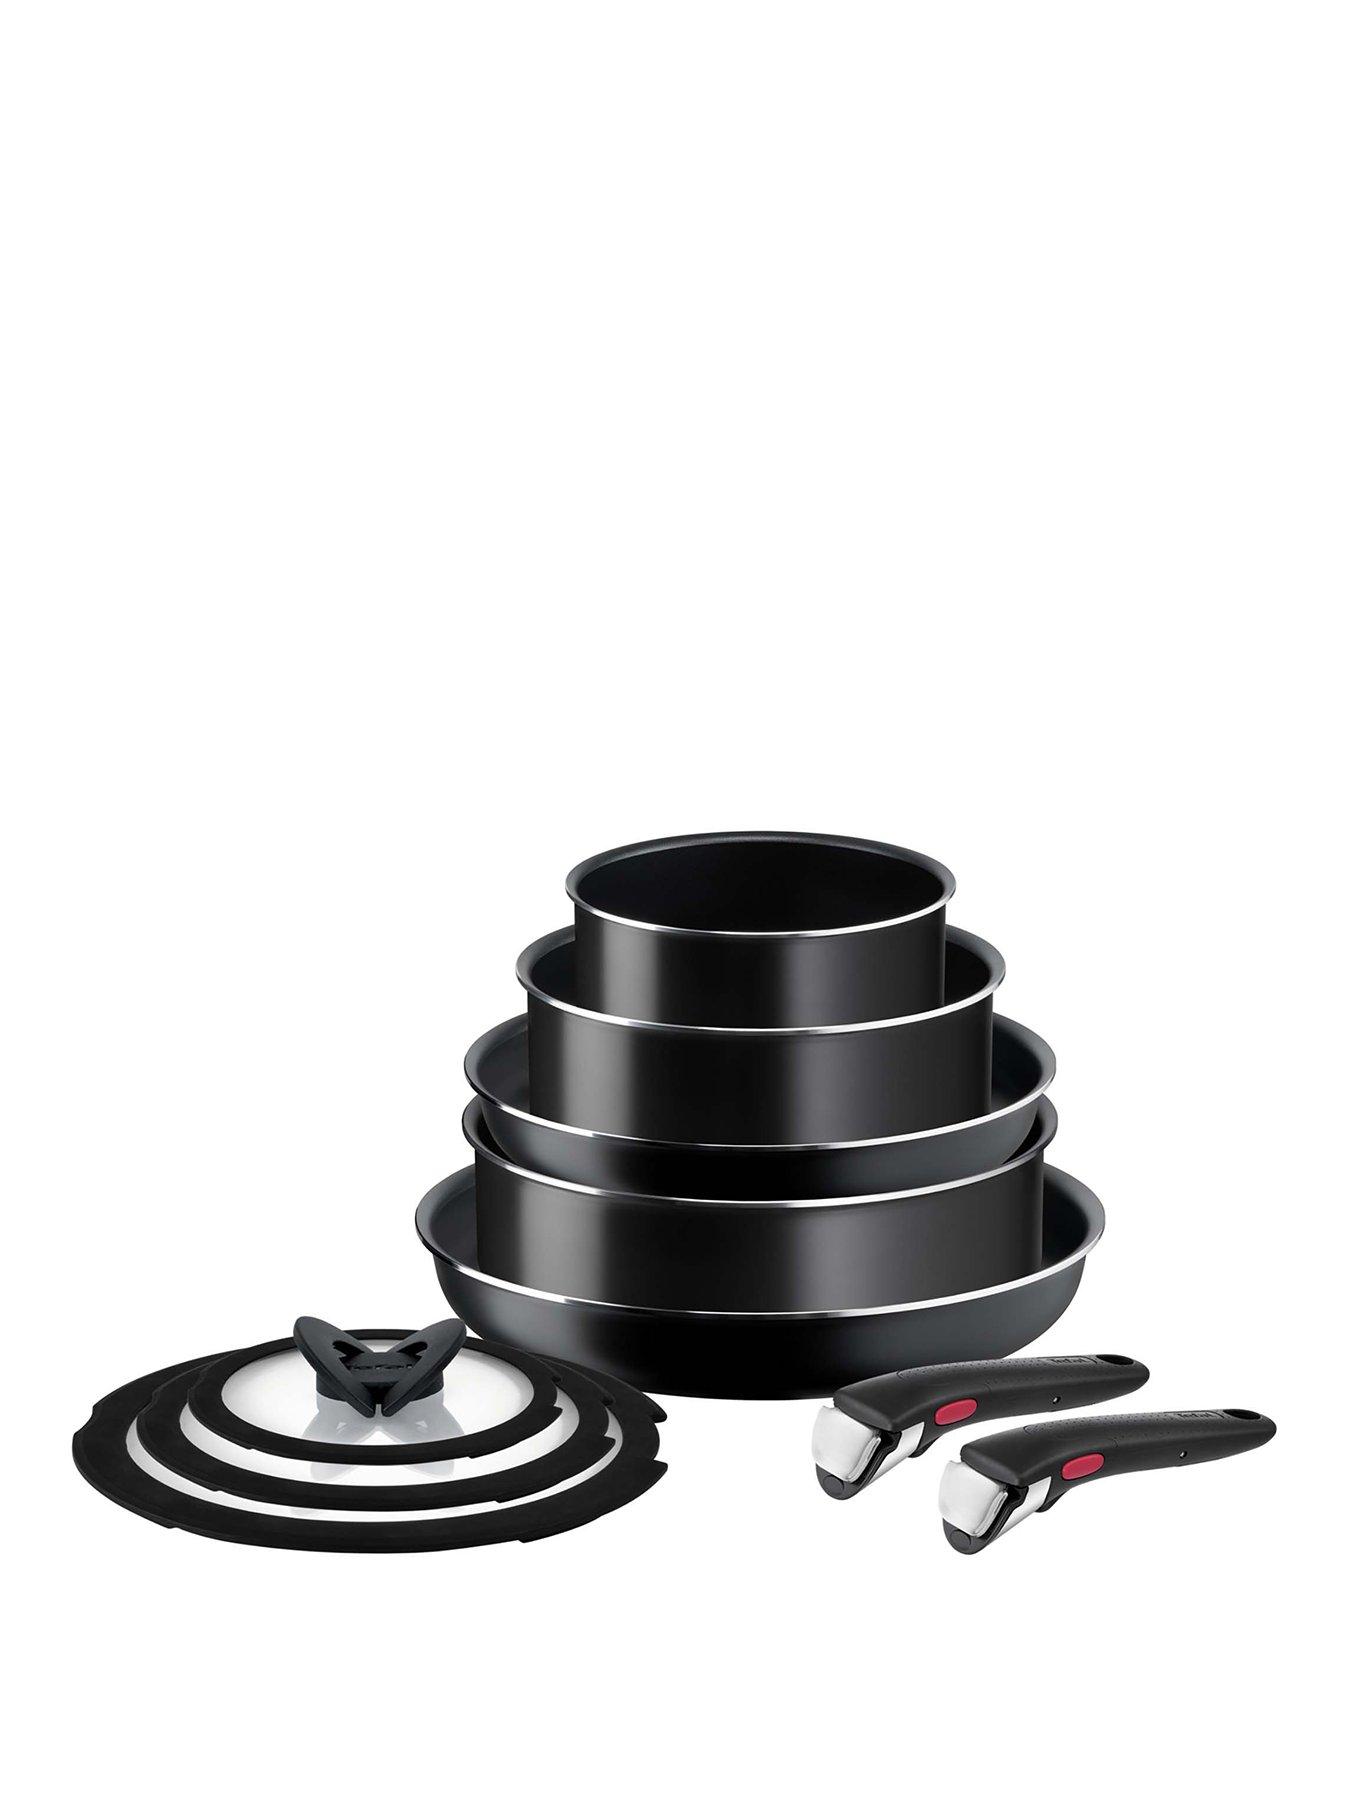 Tefal Ingenio Emotion 22 Piece Stainless Steel Pan Set Induction + GLASS  LIDS